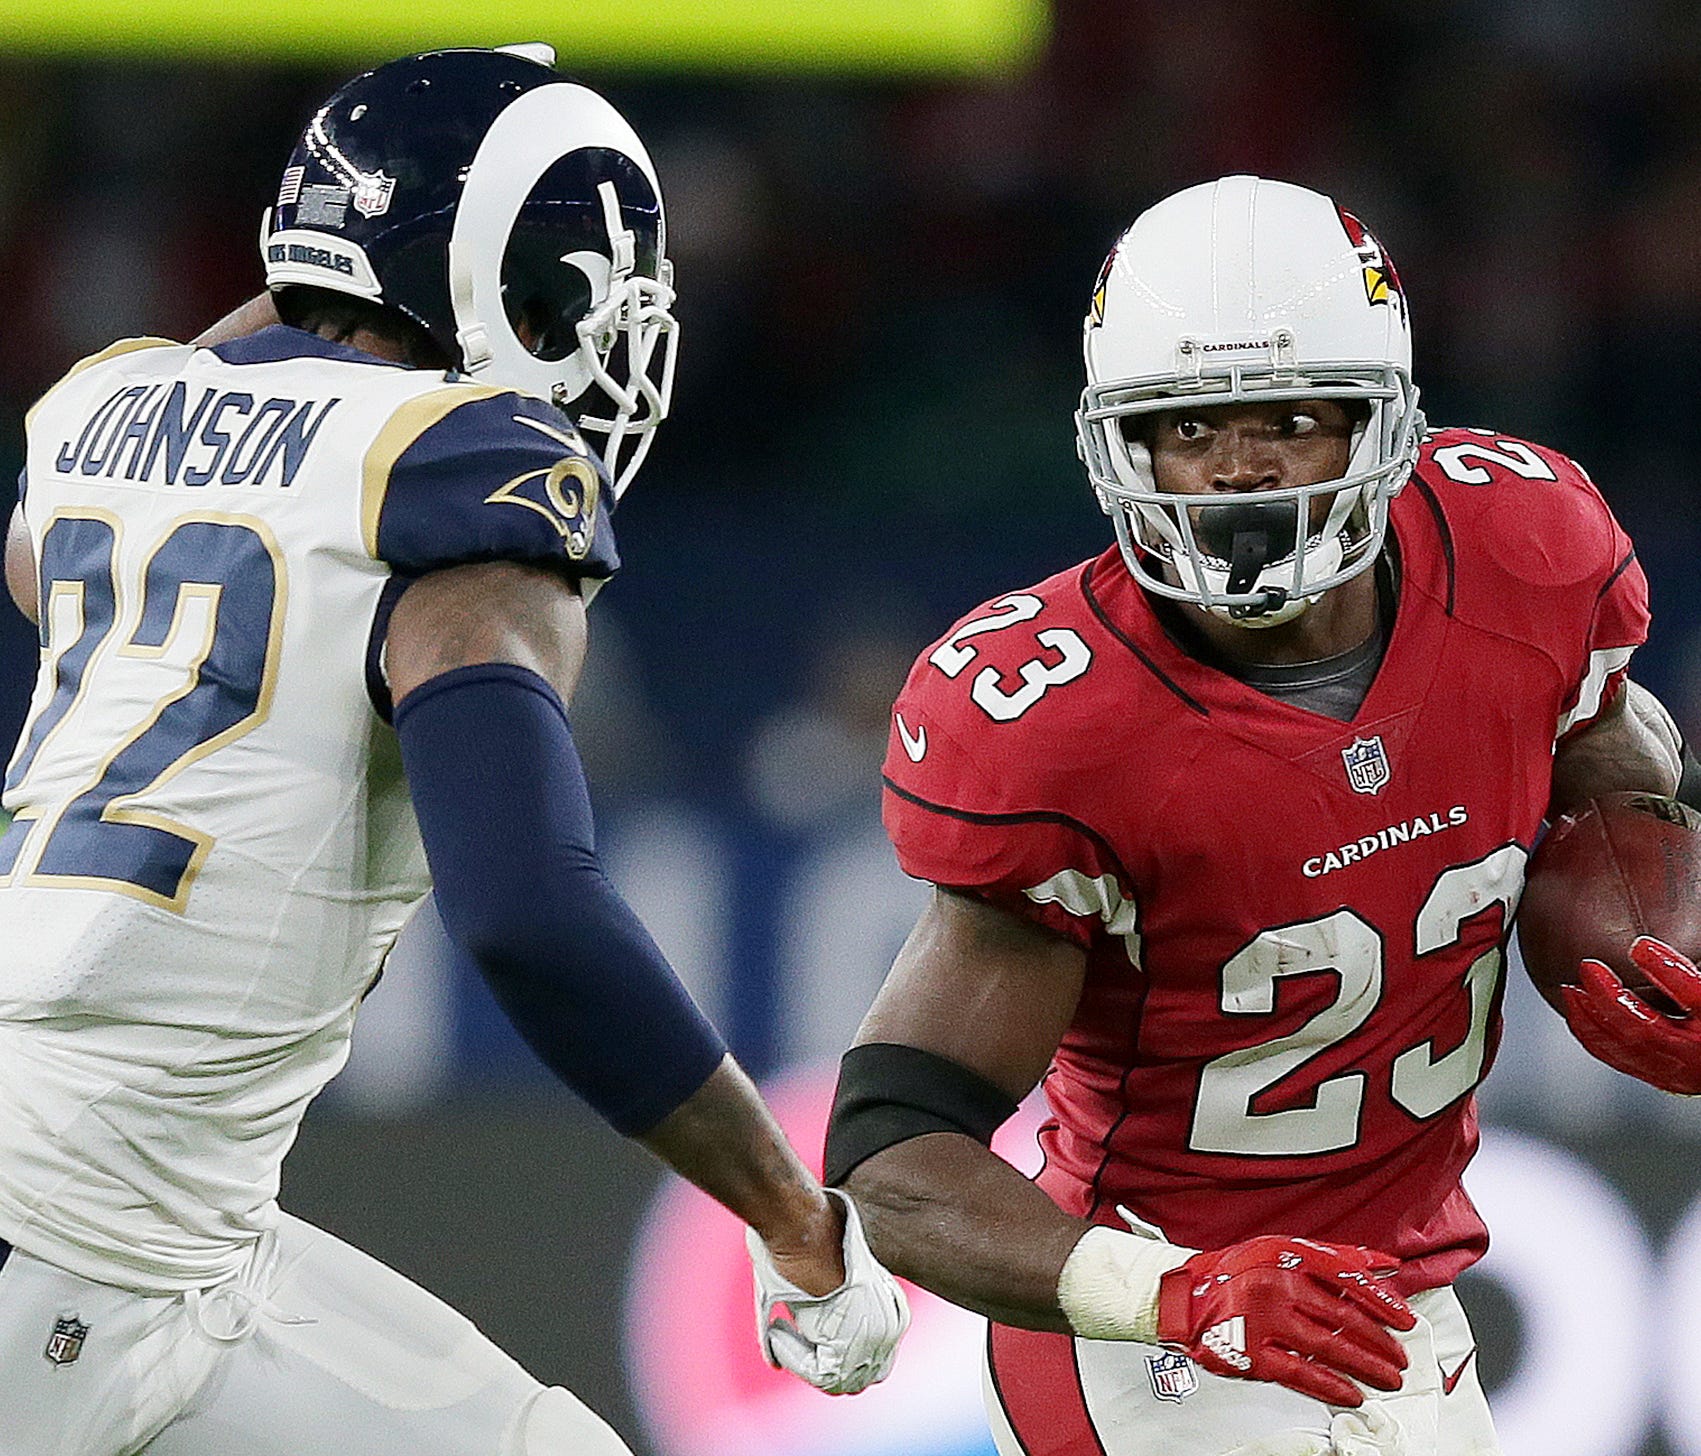 Arizona Cardinals running back Adrian Peterson (23) runs with the ball chased by Los Angeles Rams cornerback Trumaine Johnson (22) during the second half of an NFL football game at Twickenham Stadium in London, Sunday Oct. 22, 2017. (AP Photo/Tim Ire